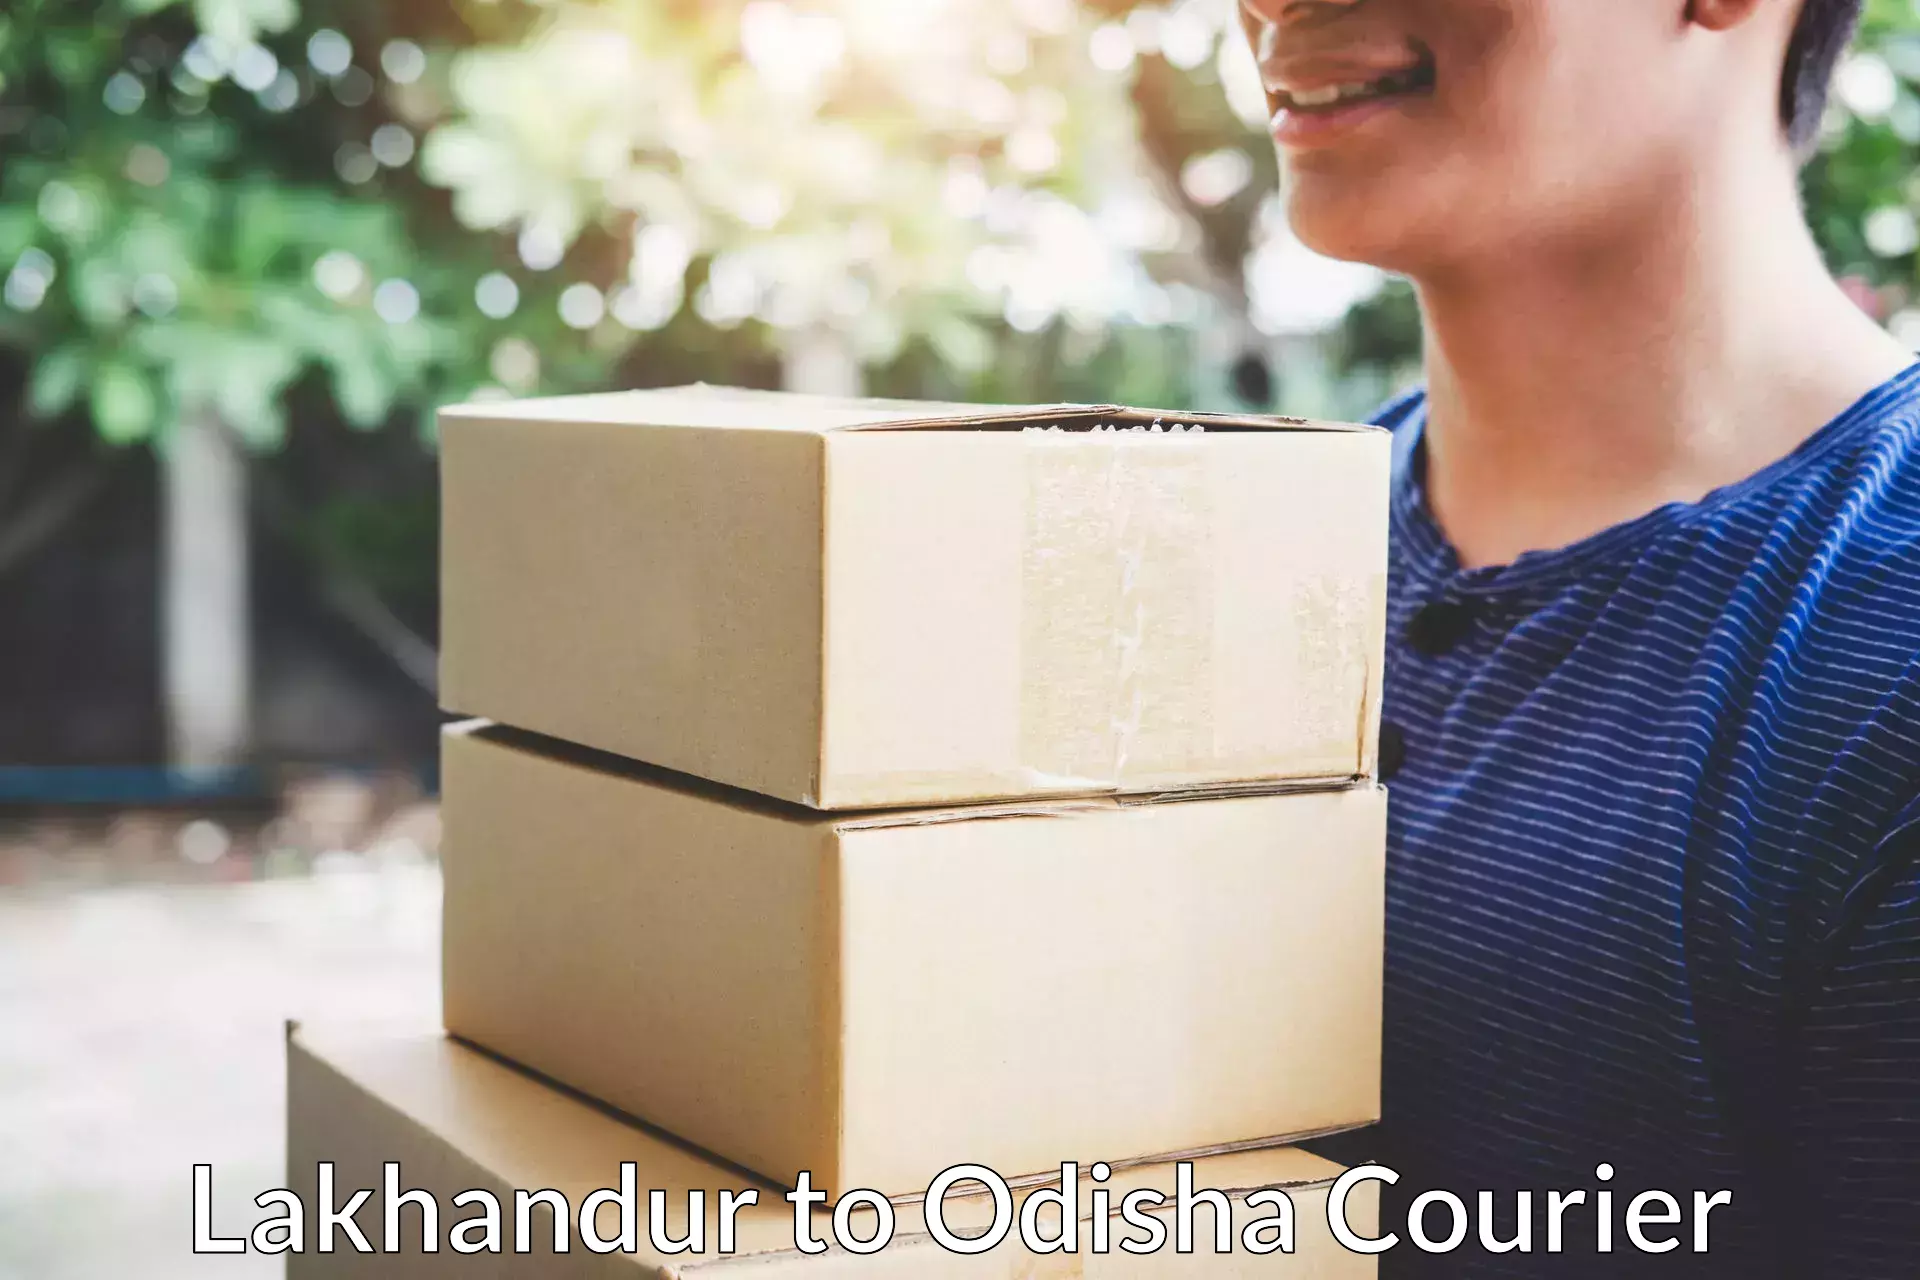 Trusted relocation experts Lakhandur to Kotapad